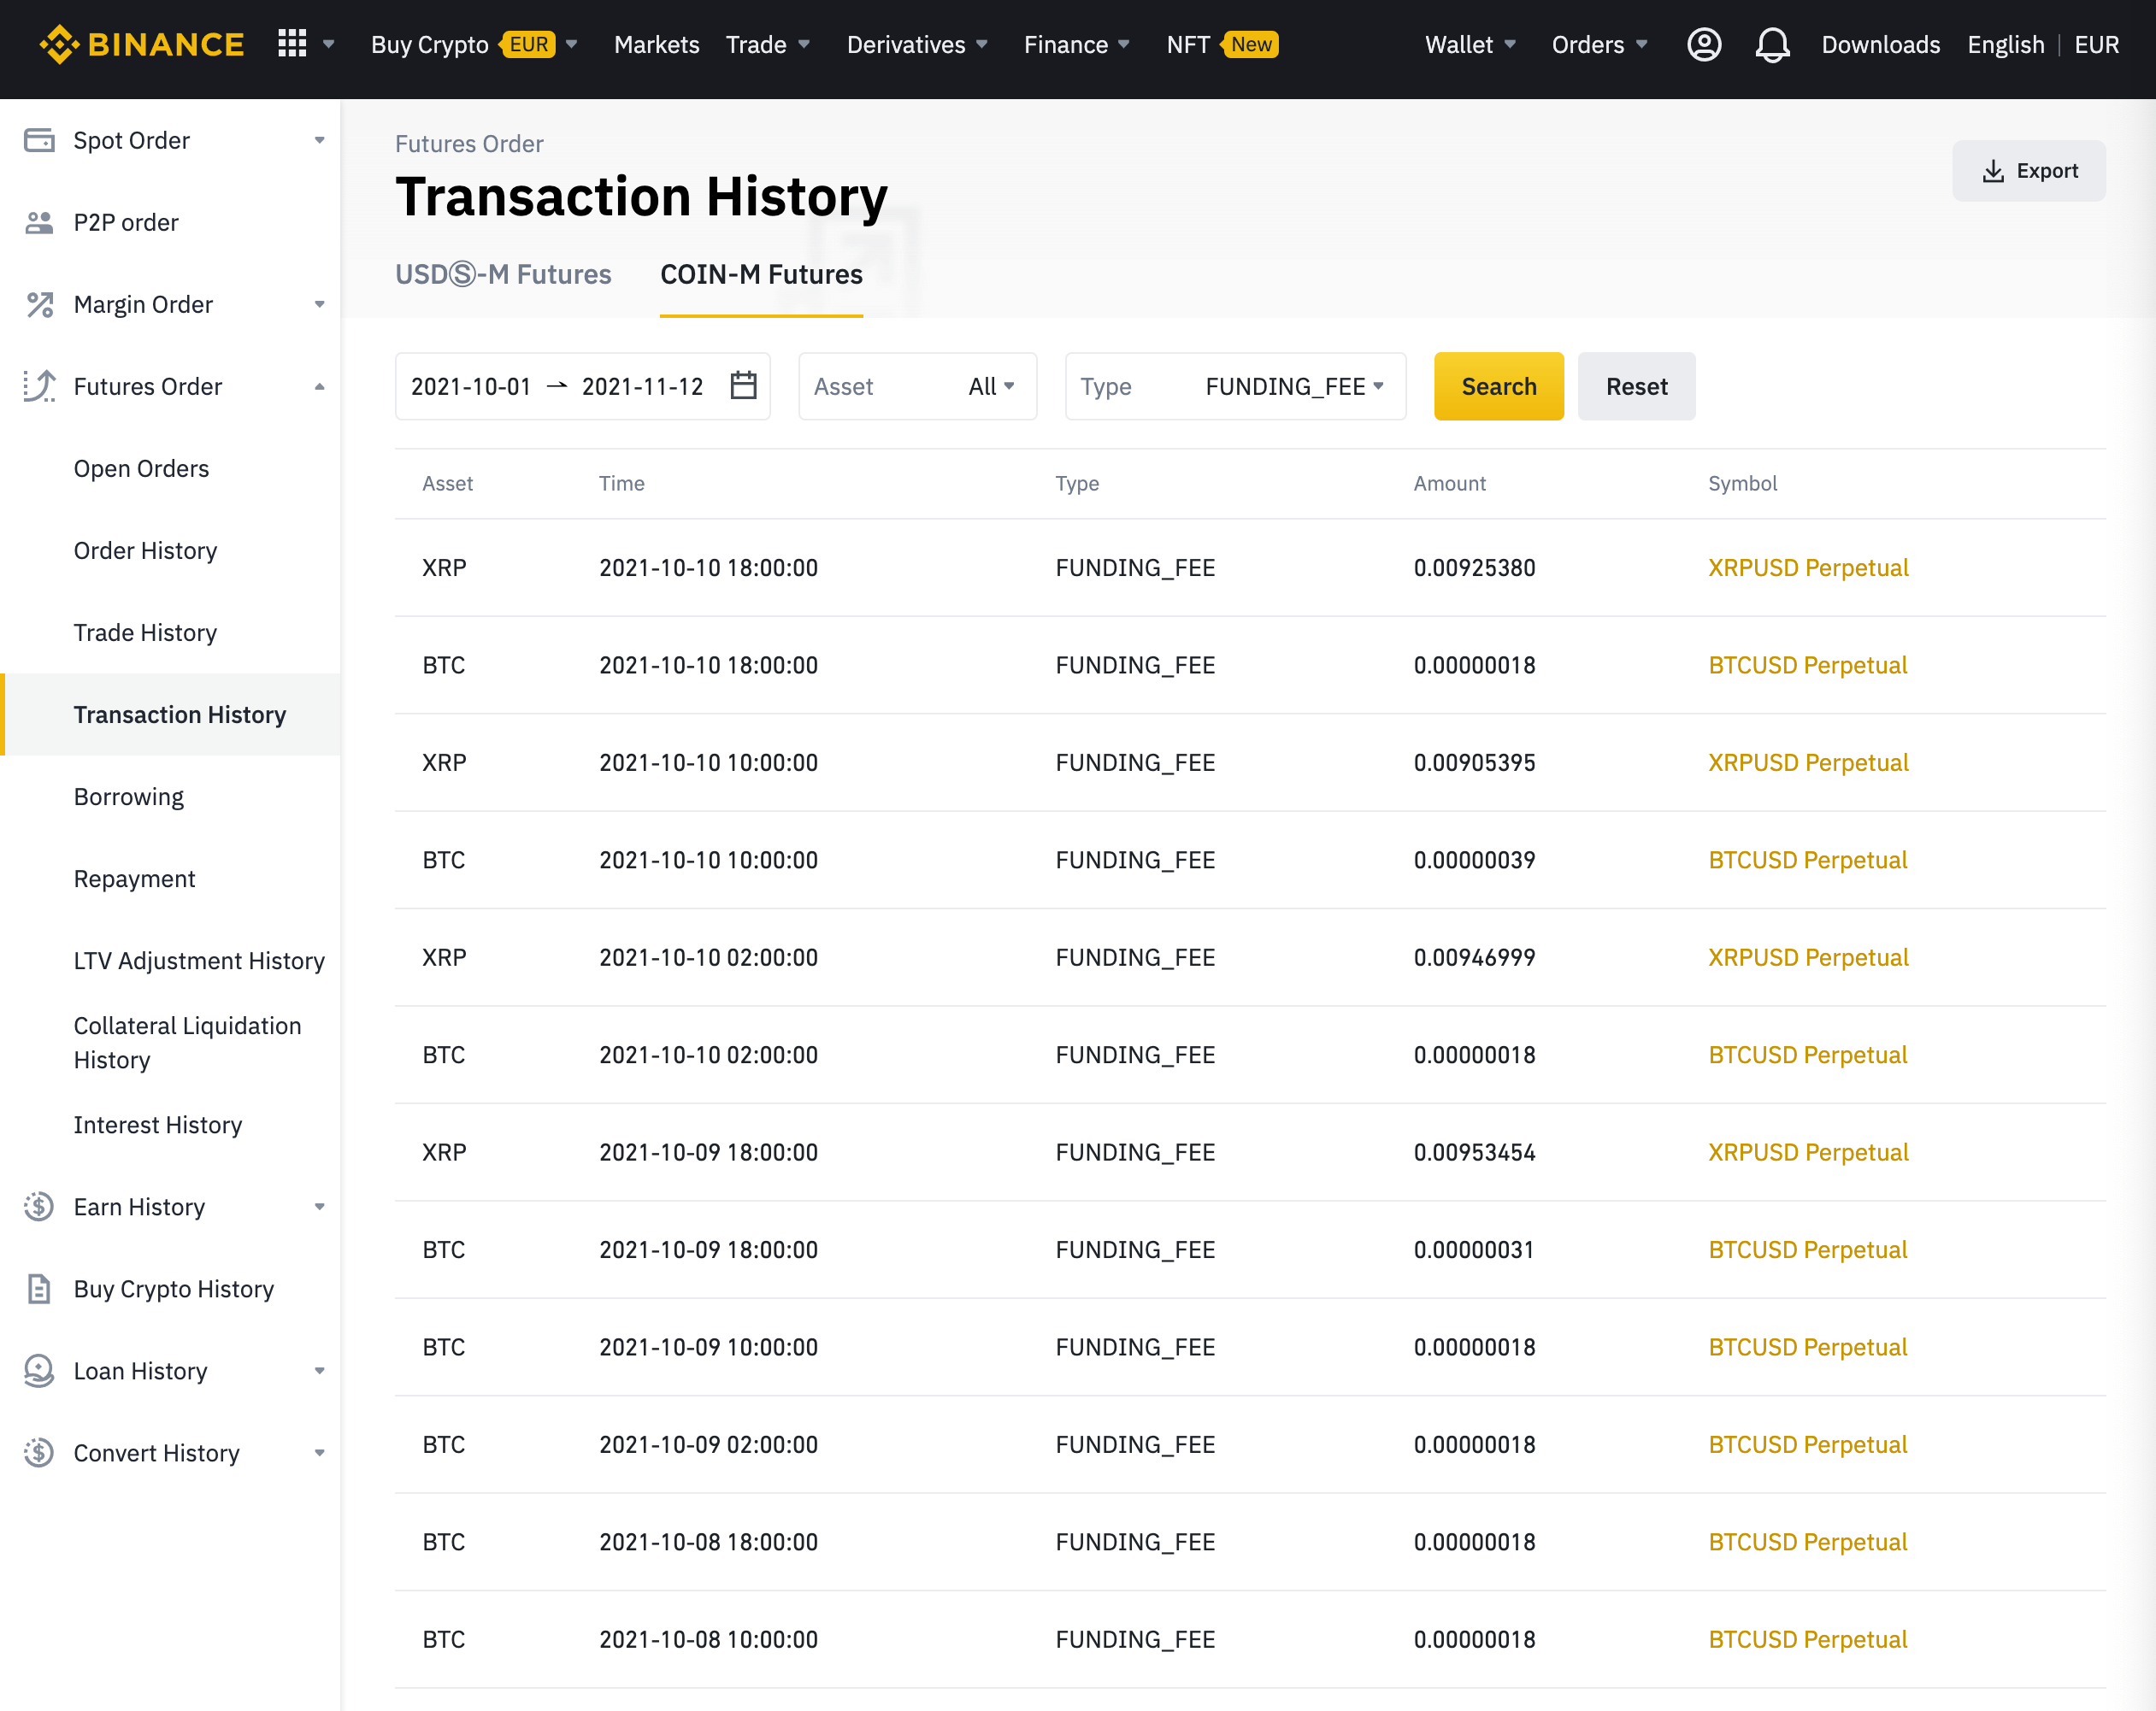 View of the transaction history. It can be seen that over the last few days the funding rate has been periodically transferred. This shows that the arbitrage trading strategy has been successfully applied.